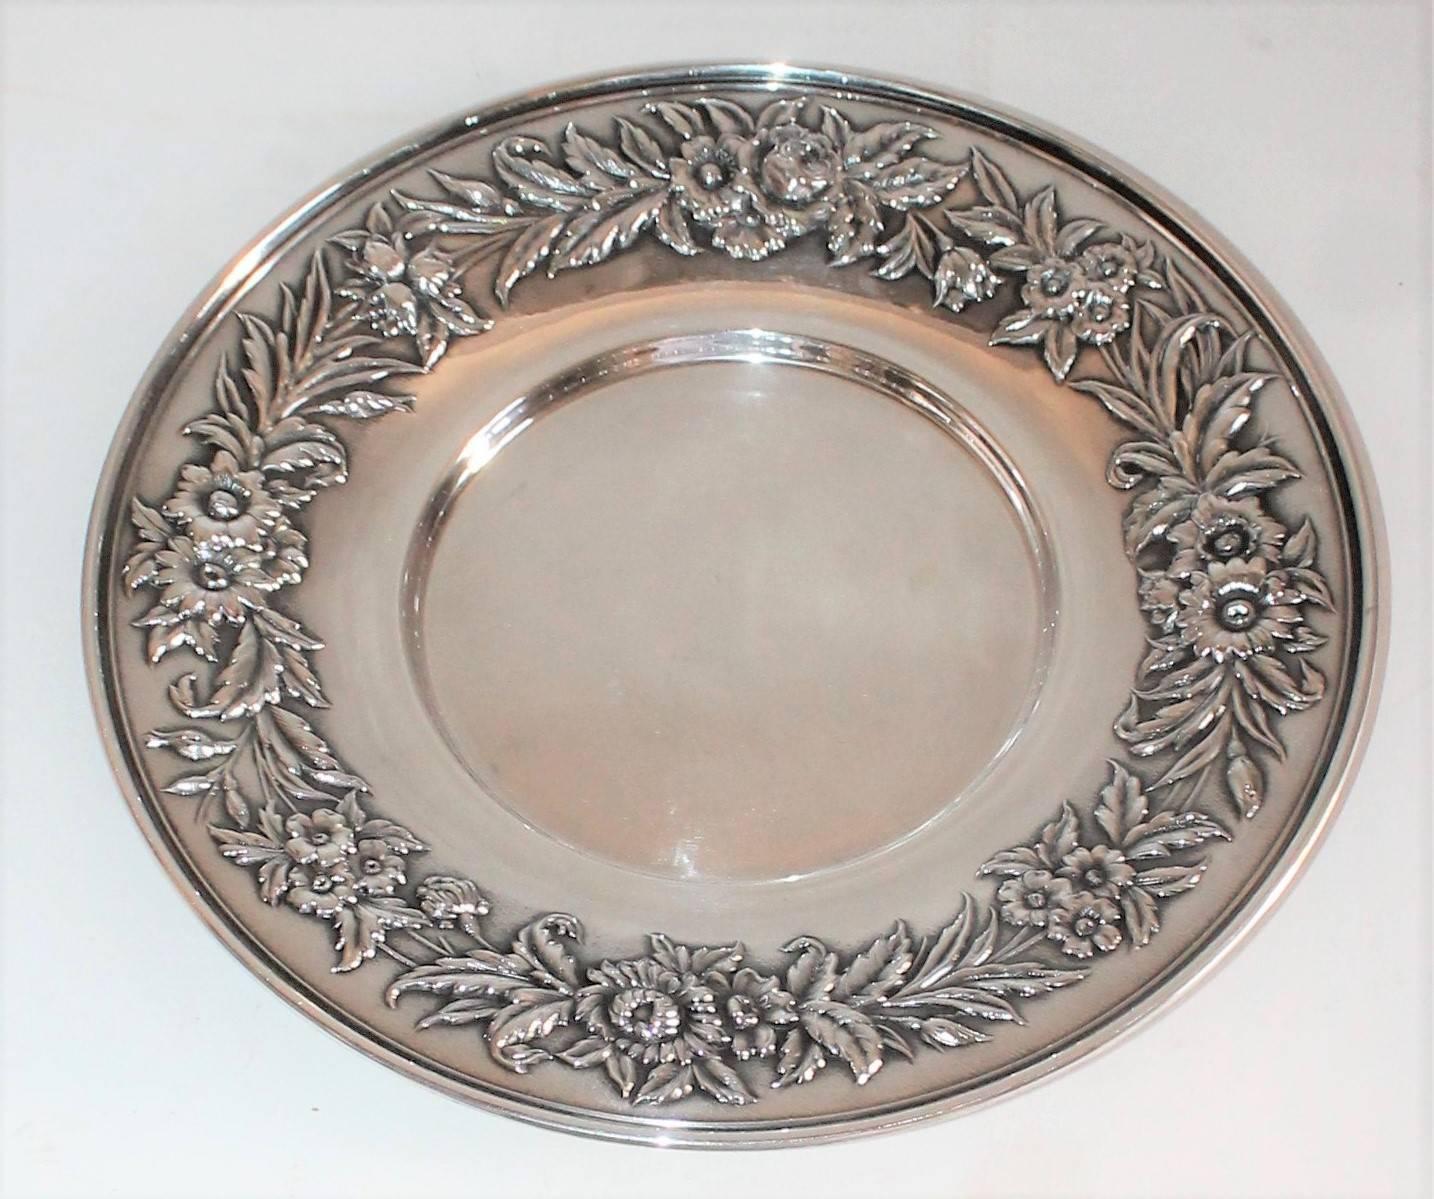 These two fancy pieces of heavy Kirk sterling silver serving oval bowl and round serving platter are in pristine condition and are both signed S.KIRK & SON STERLING. Nice heavy weight.